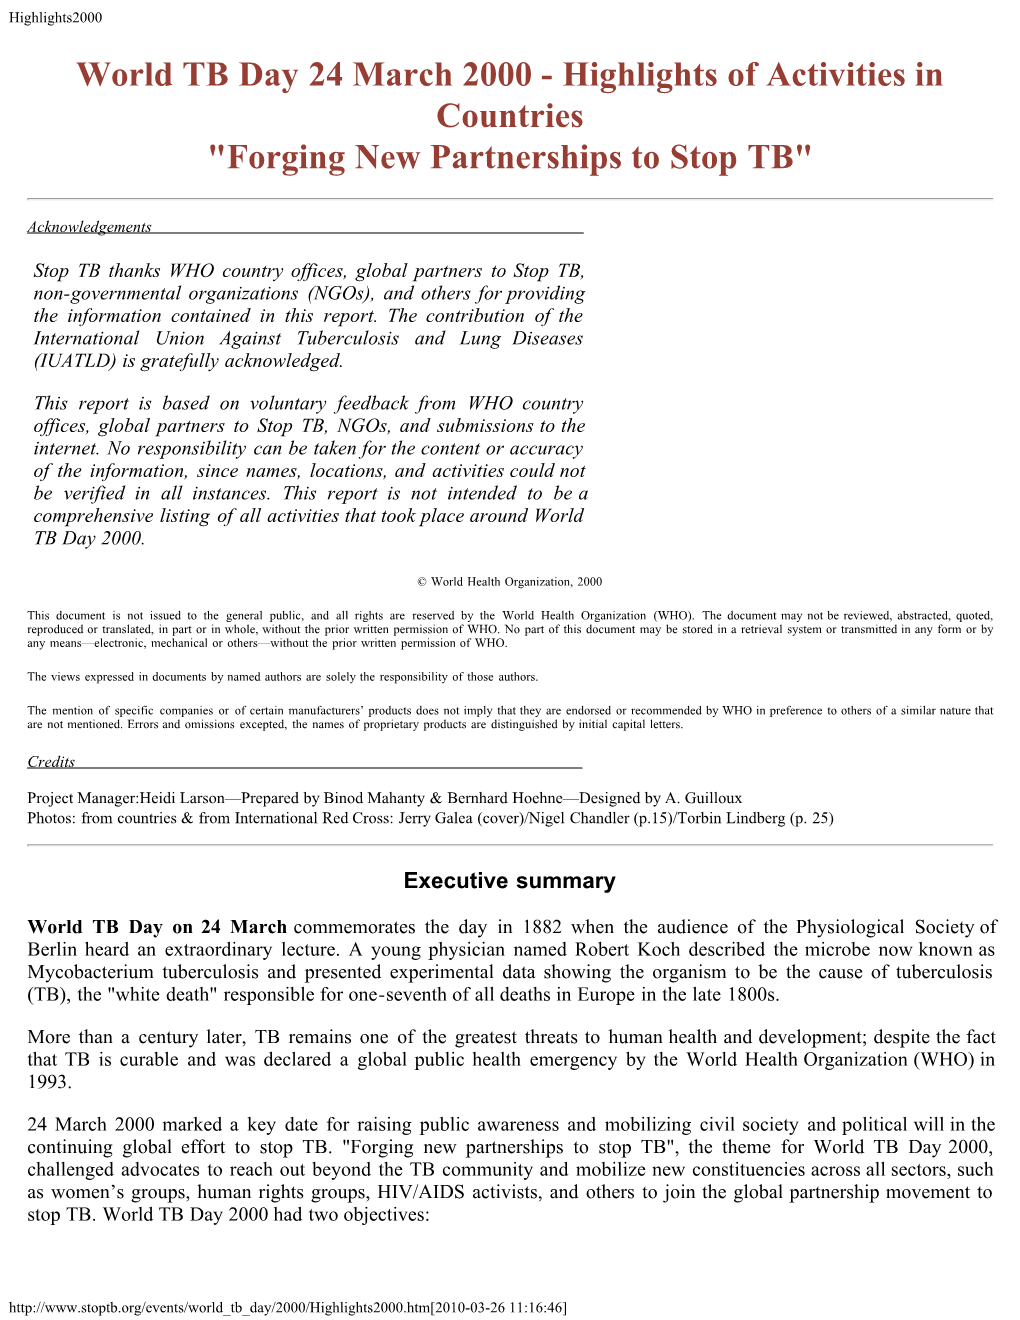 World TB Day 24 March 2000 - Highlights of Activities in Countries "Forging New Partnerships to Stop TB"